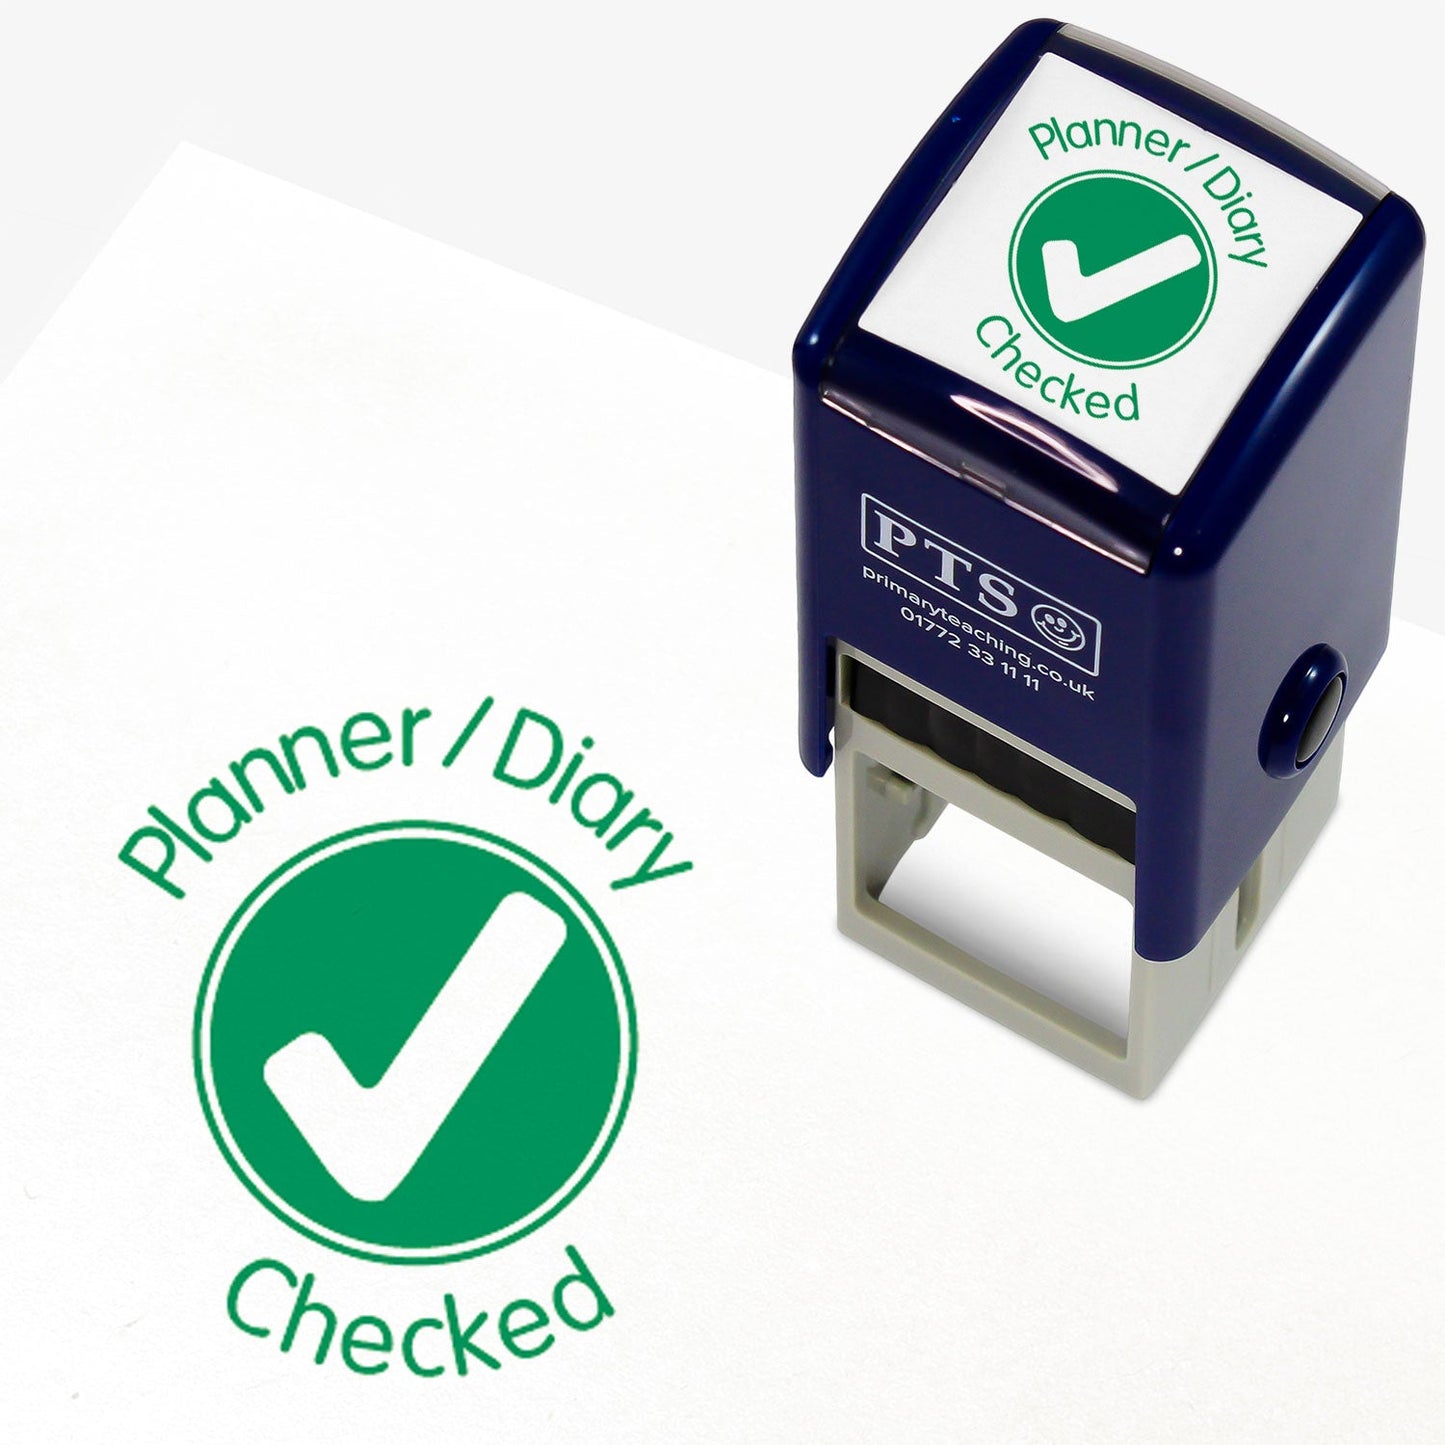 Planner/Diary Checked Stamper - 25mm